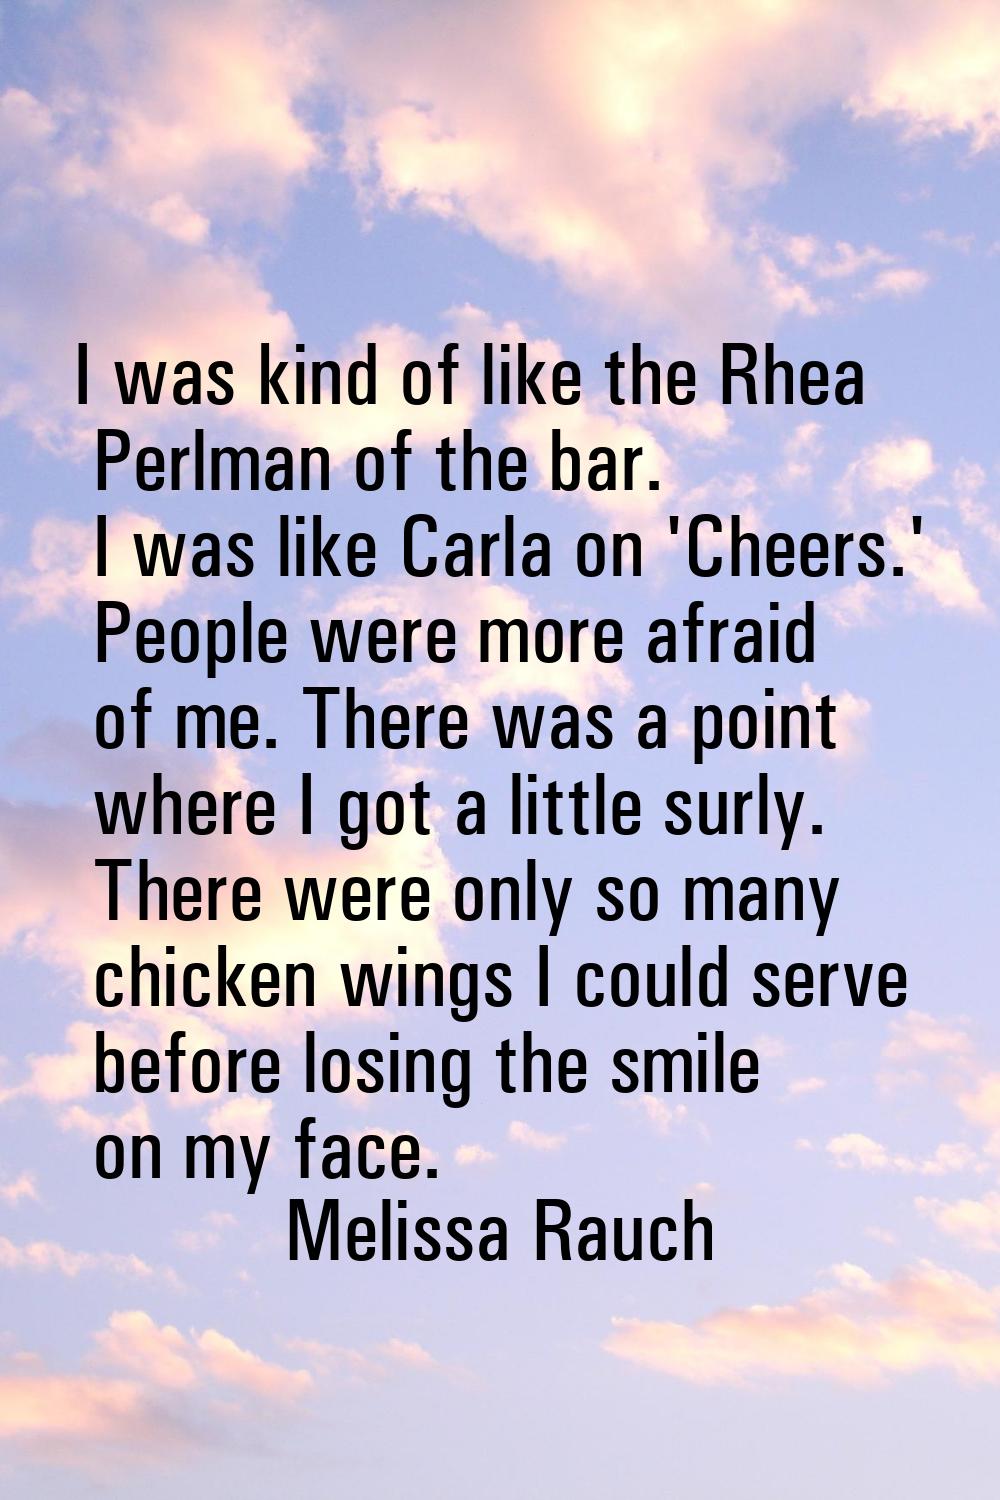 I was kind of like the Rhea Perlman of the bar. I was like Carla on 'Cheers.' People were more afra